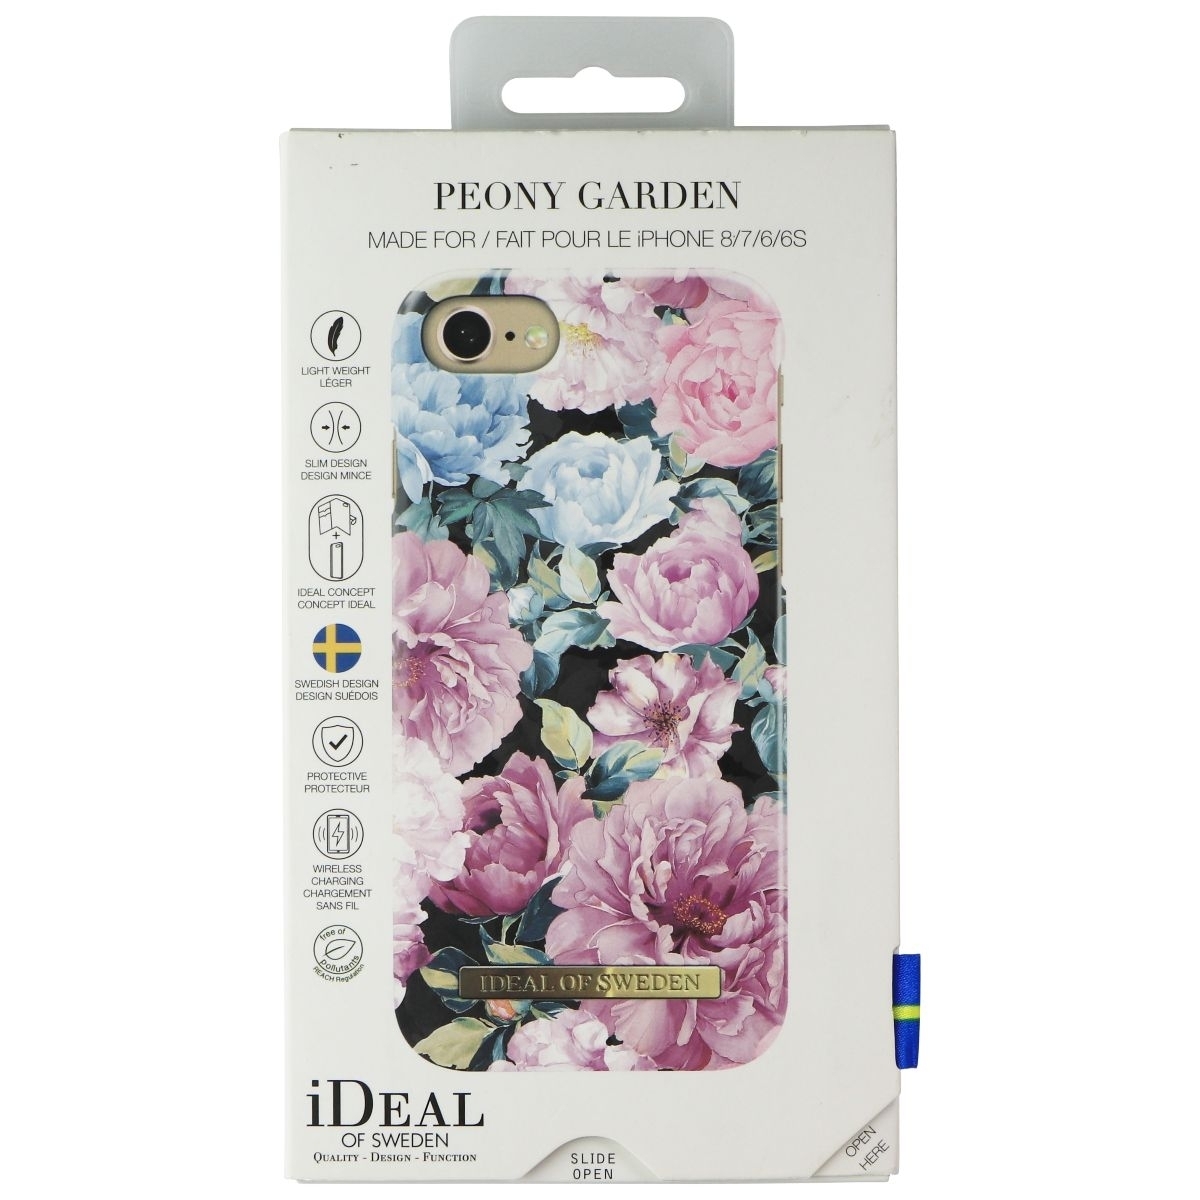 IDeal Of Sweden Hard Case For Apple IPhone 8/7/6s/6 - Peony Garden (Refurbished)